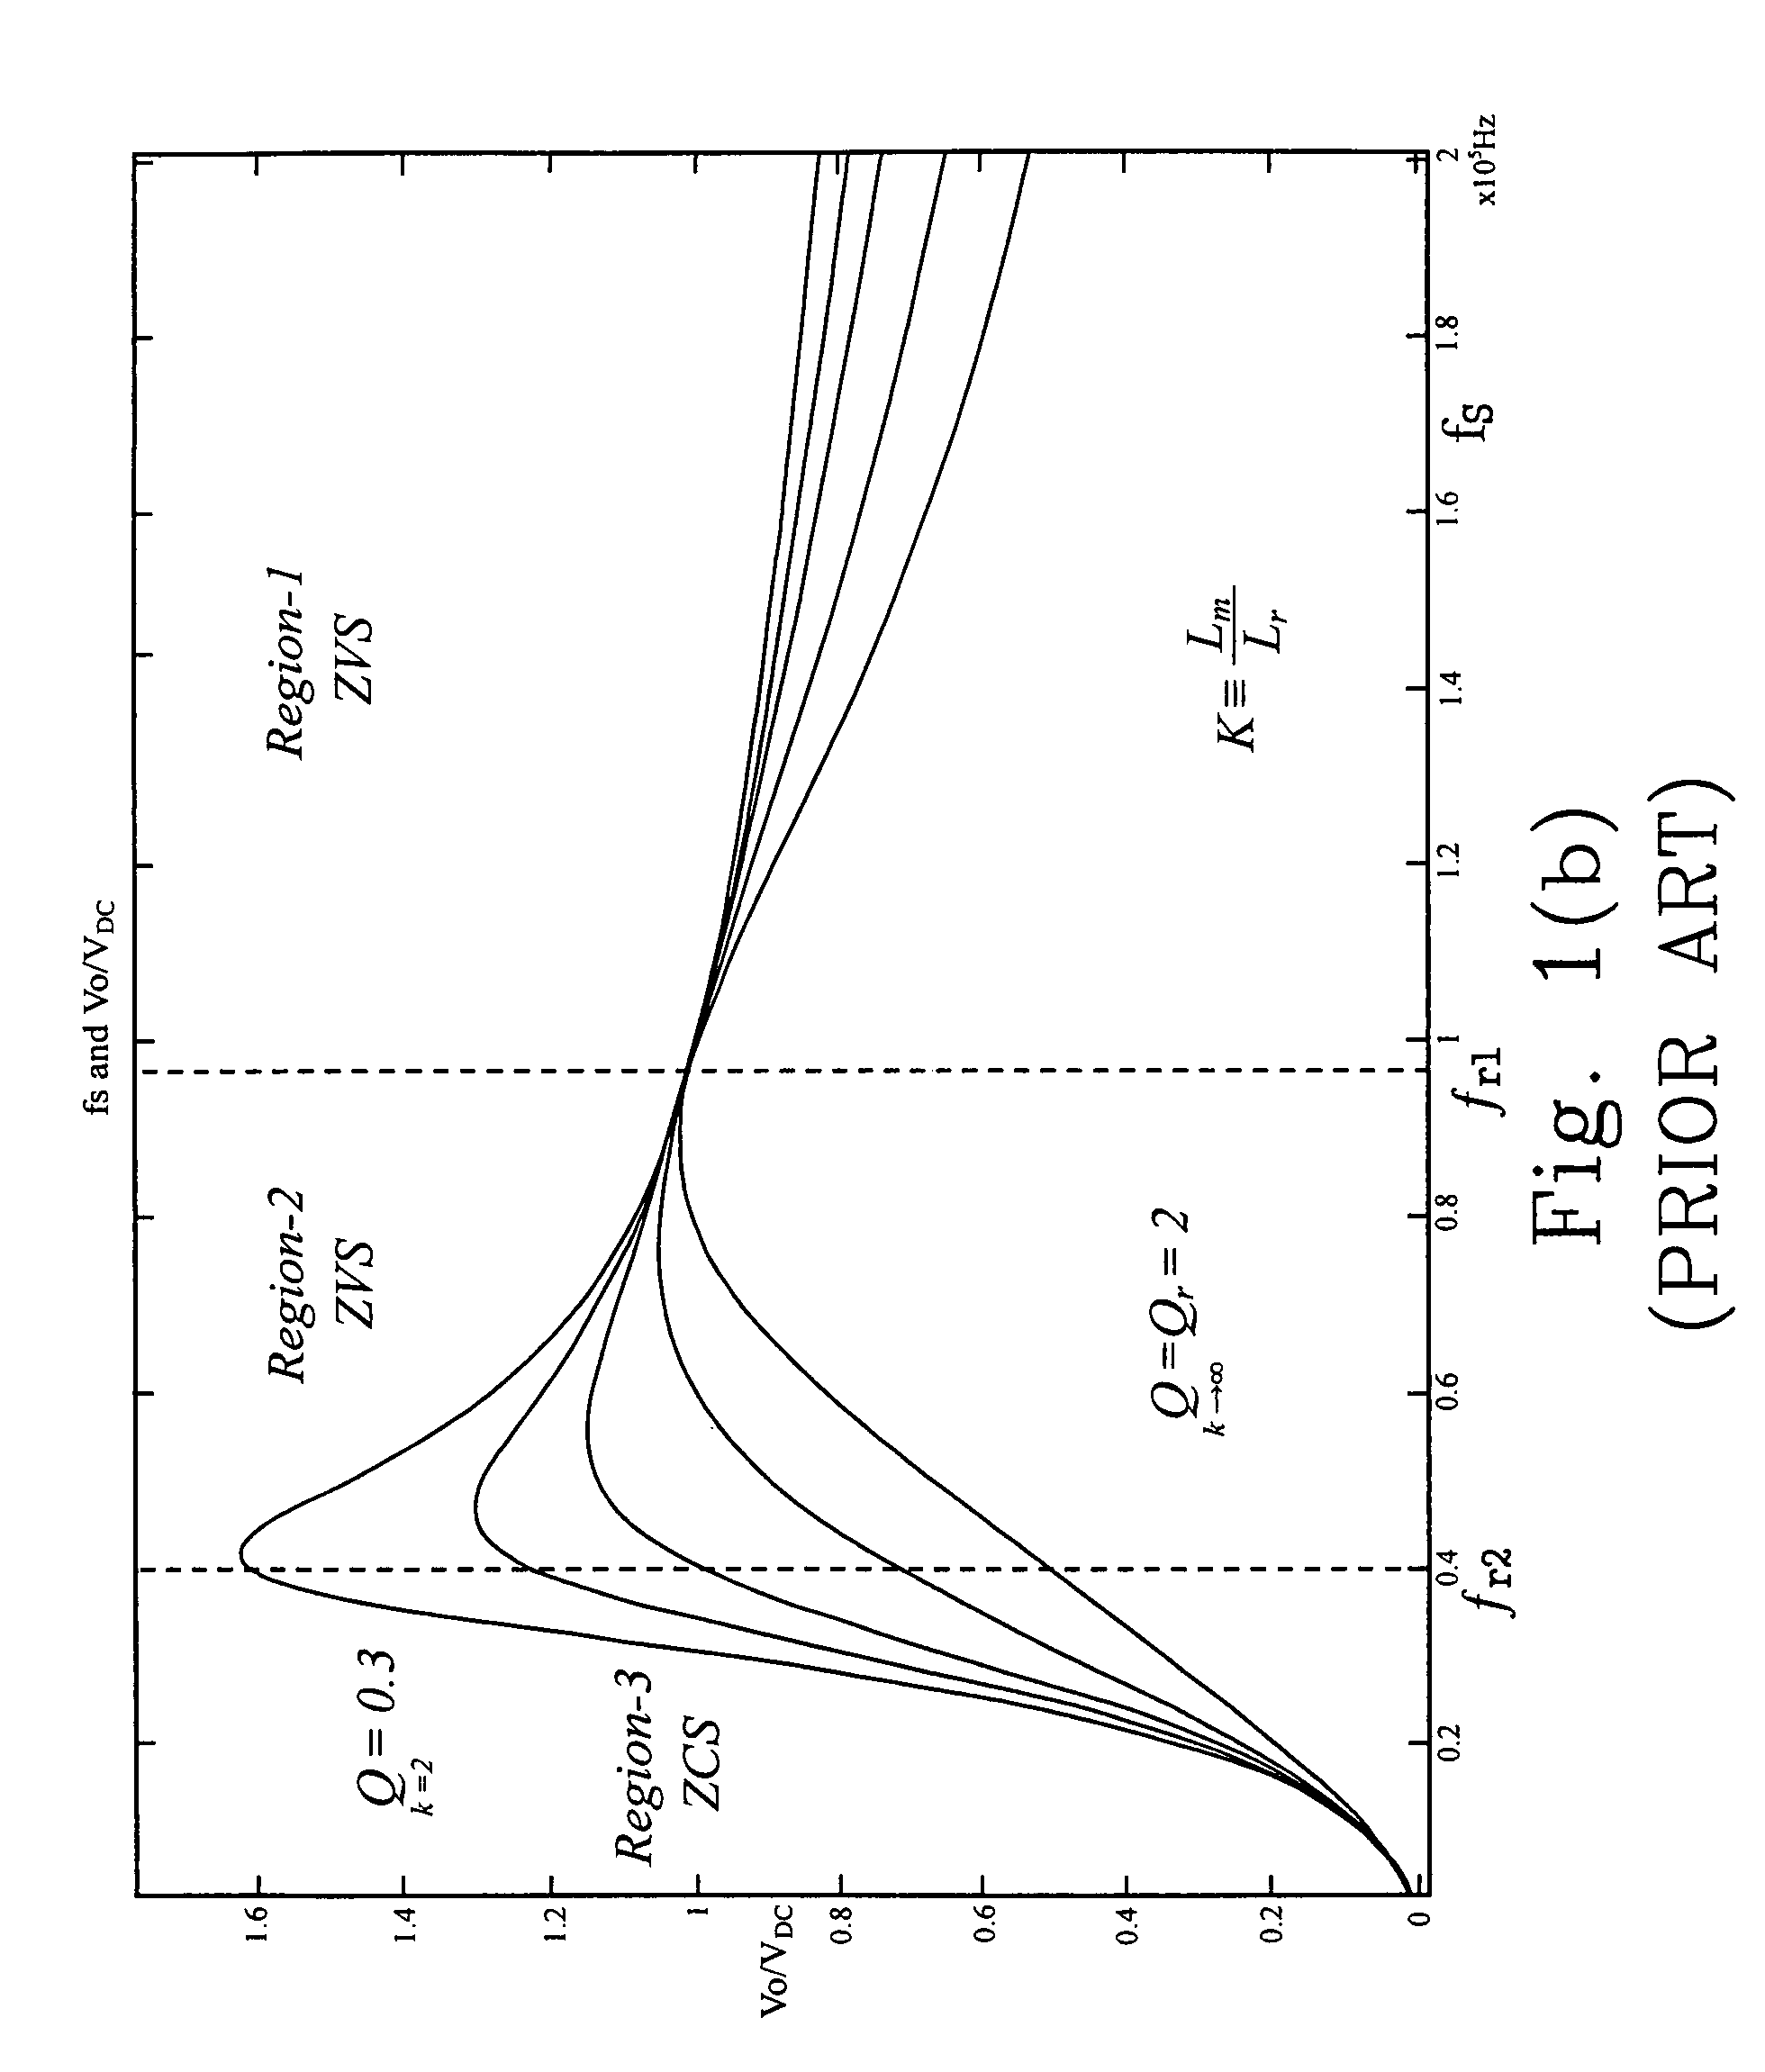 Resonant converter with synchronous rectification drive circuit